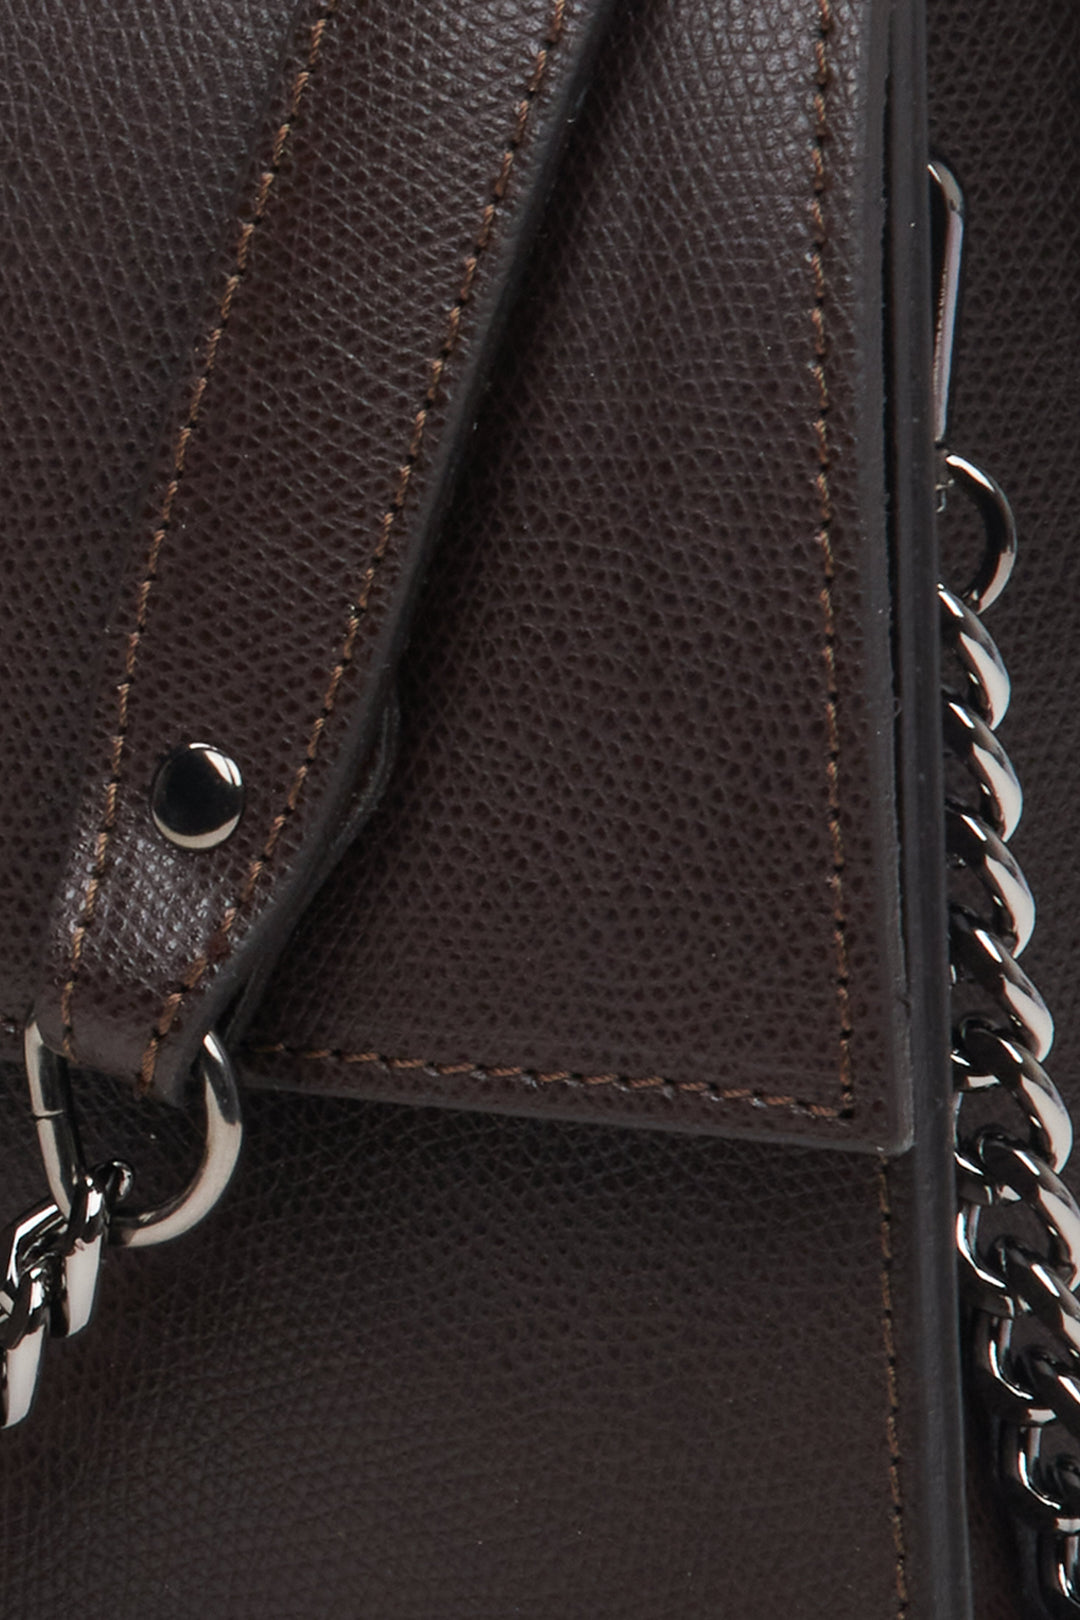 Women's dark brown leather handbag with a flap by Estro - close-up on the details.